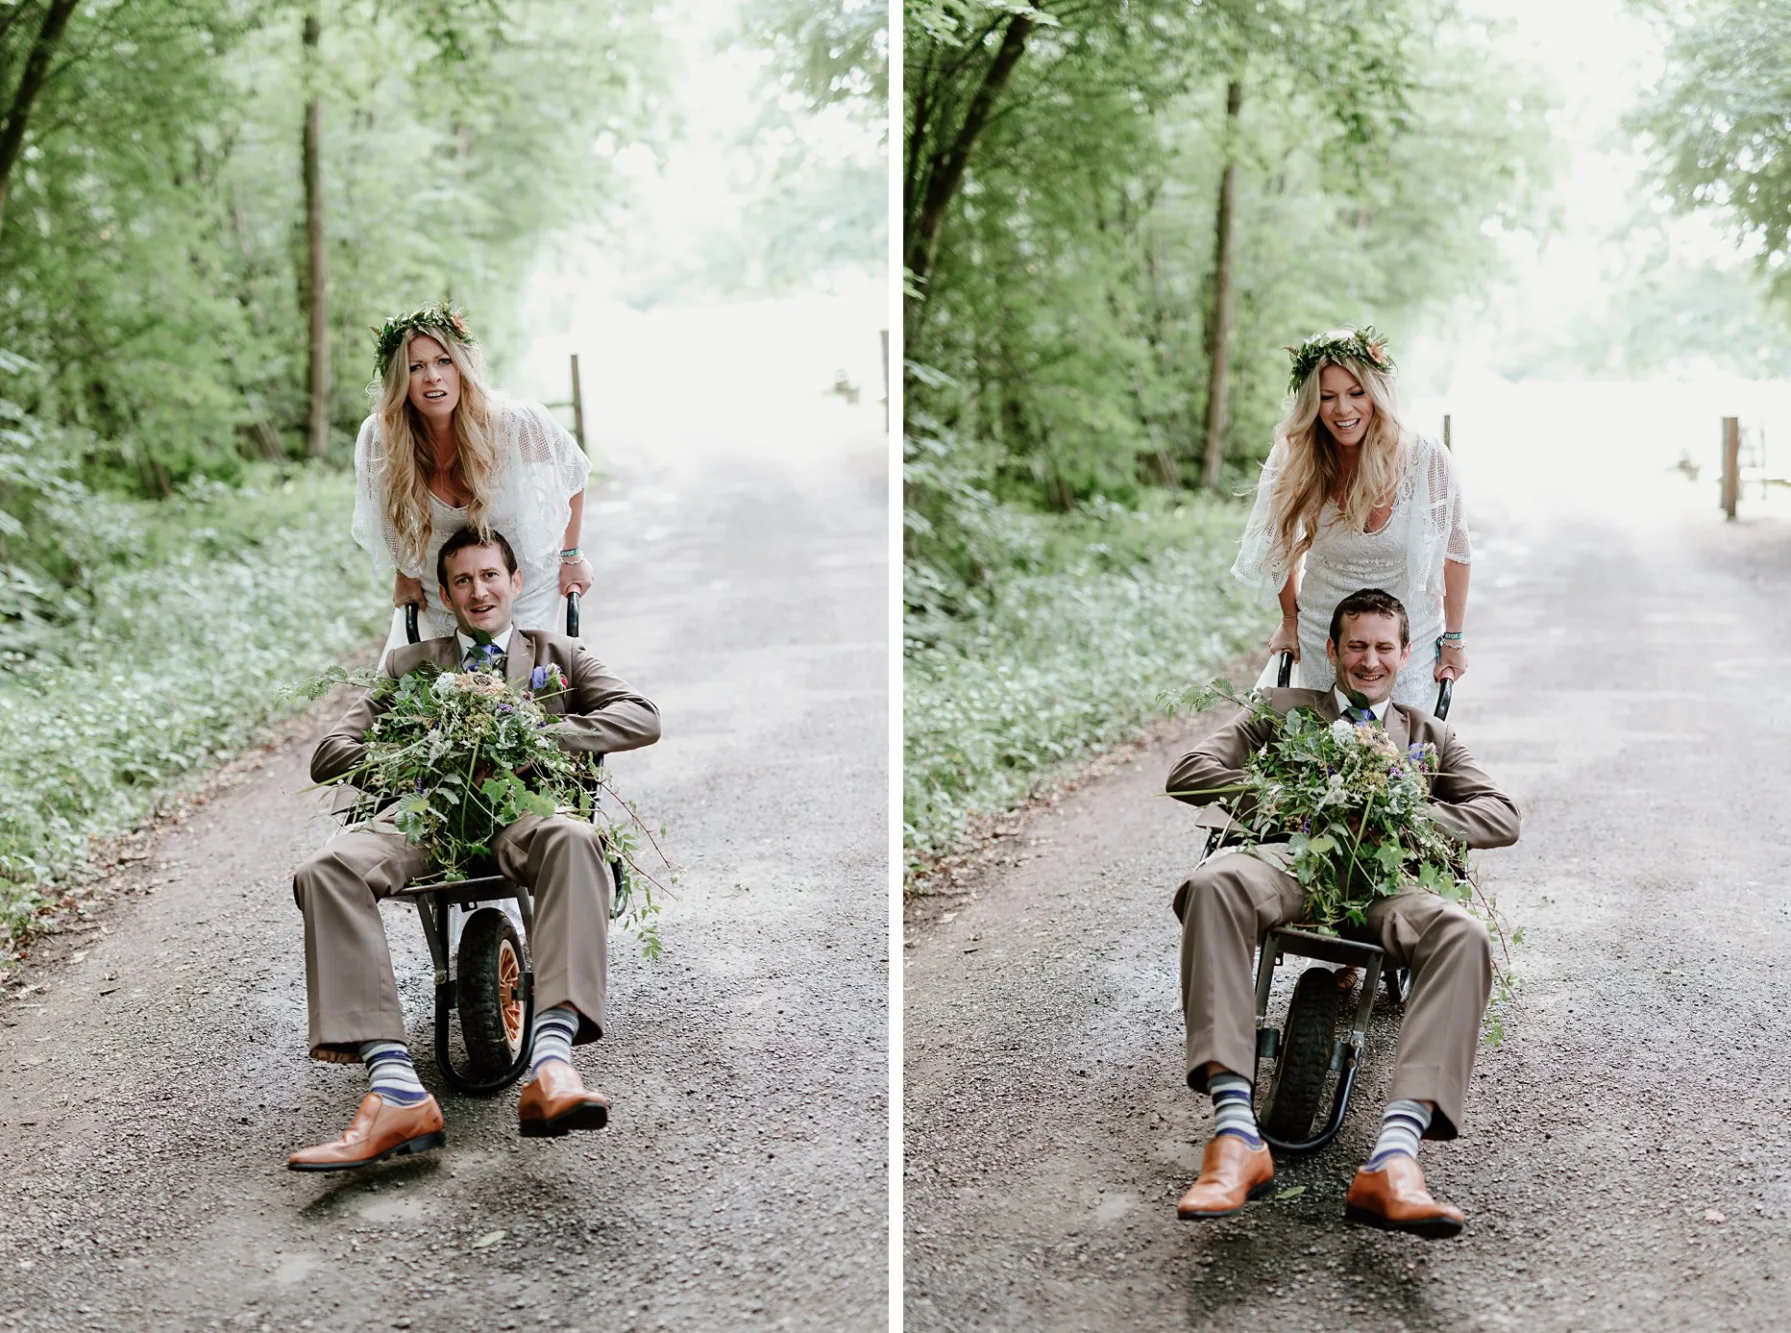 Bride pushing groom in a wheelbarrow. Both of them are laughing and smiling. The groom is holding a wedding bouquet.